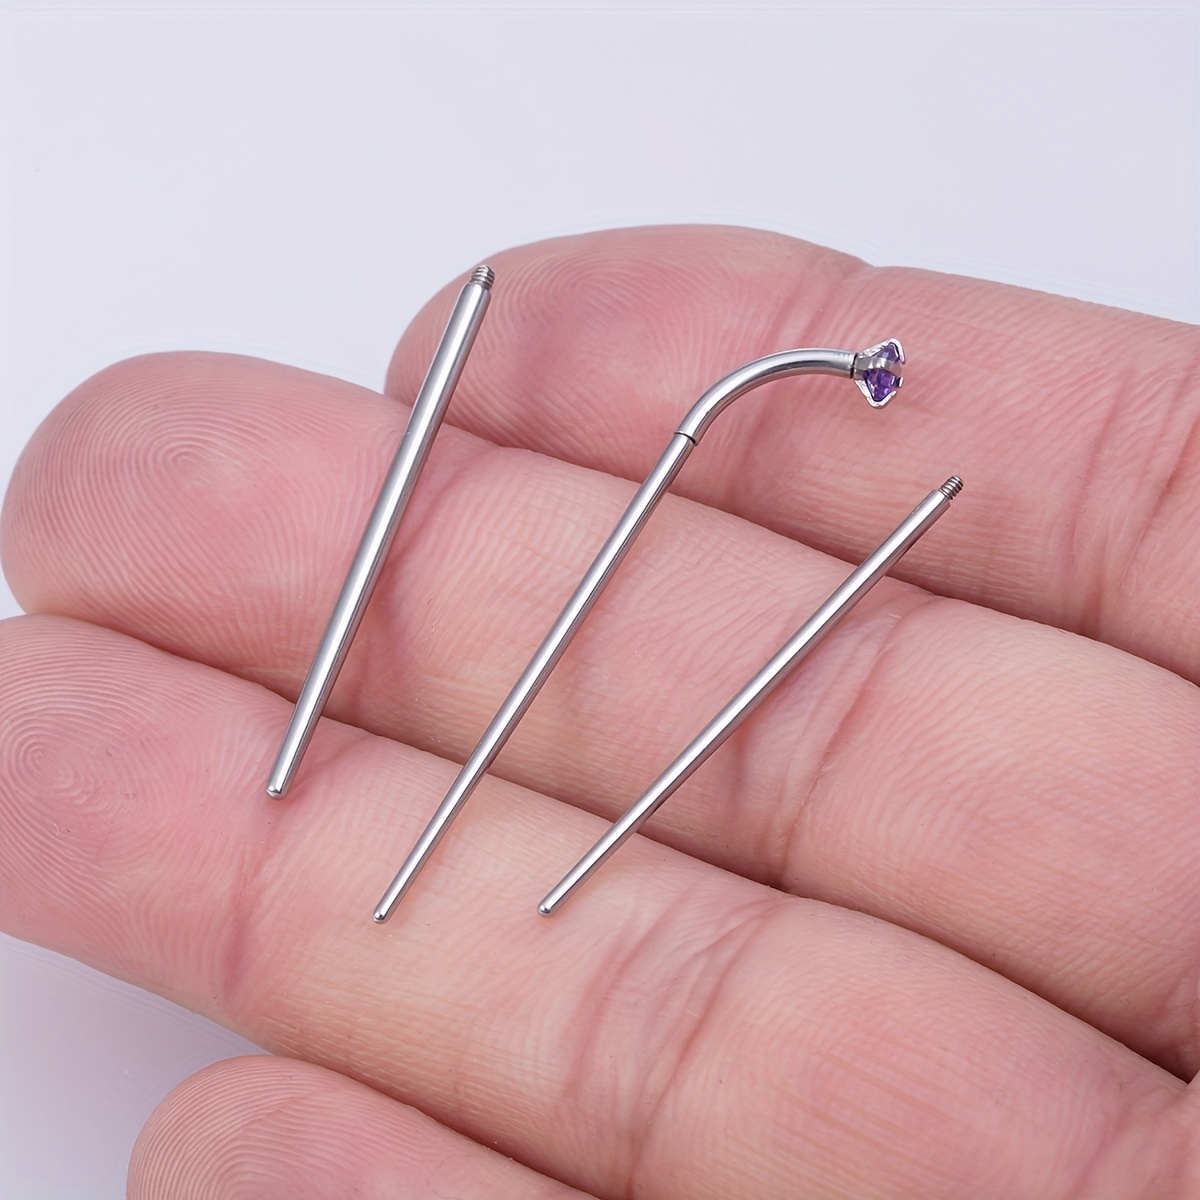 New 316L Stainless Steel Insertion Pin Taper Piercing Tool for Internally  Threaded Body Jewelry Labret Lip Dermal Pull Pin Tools